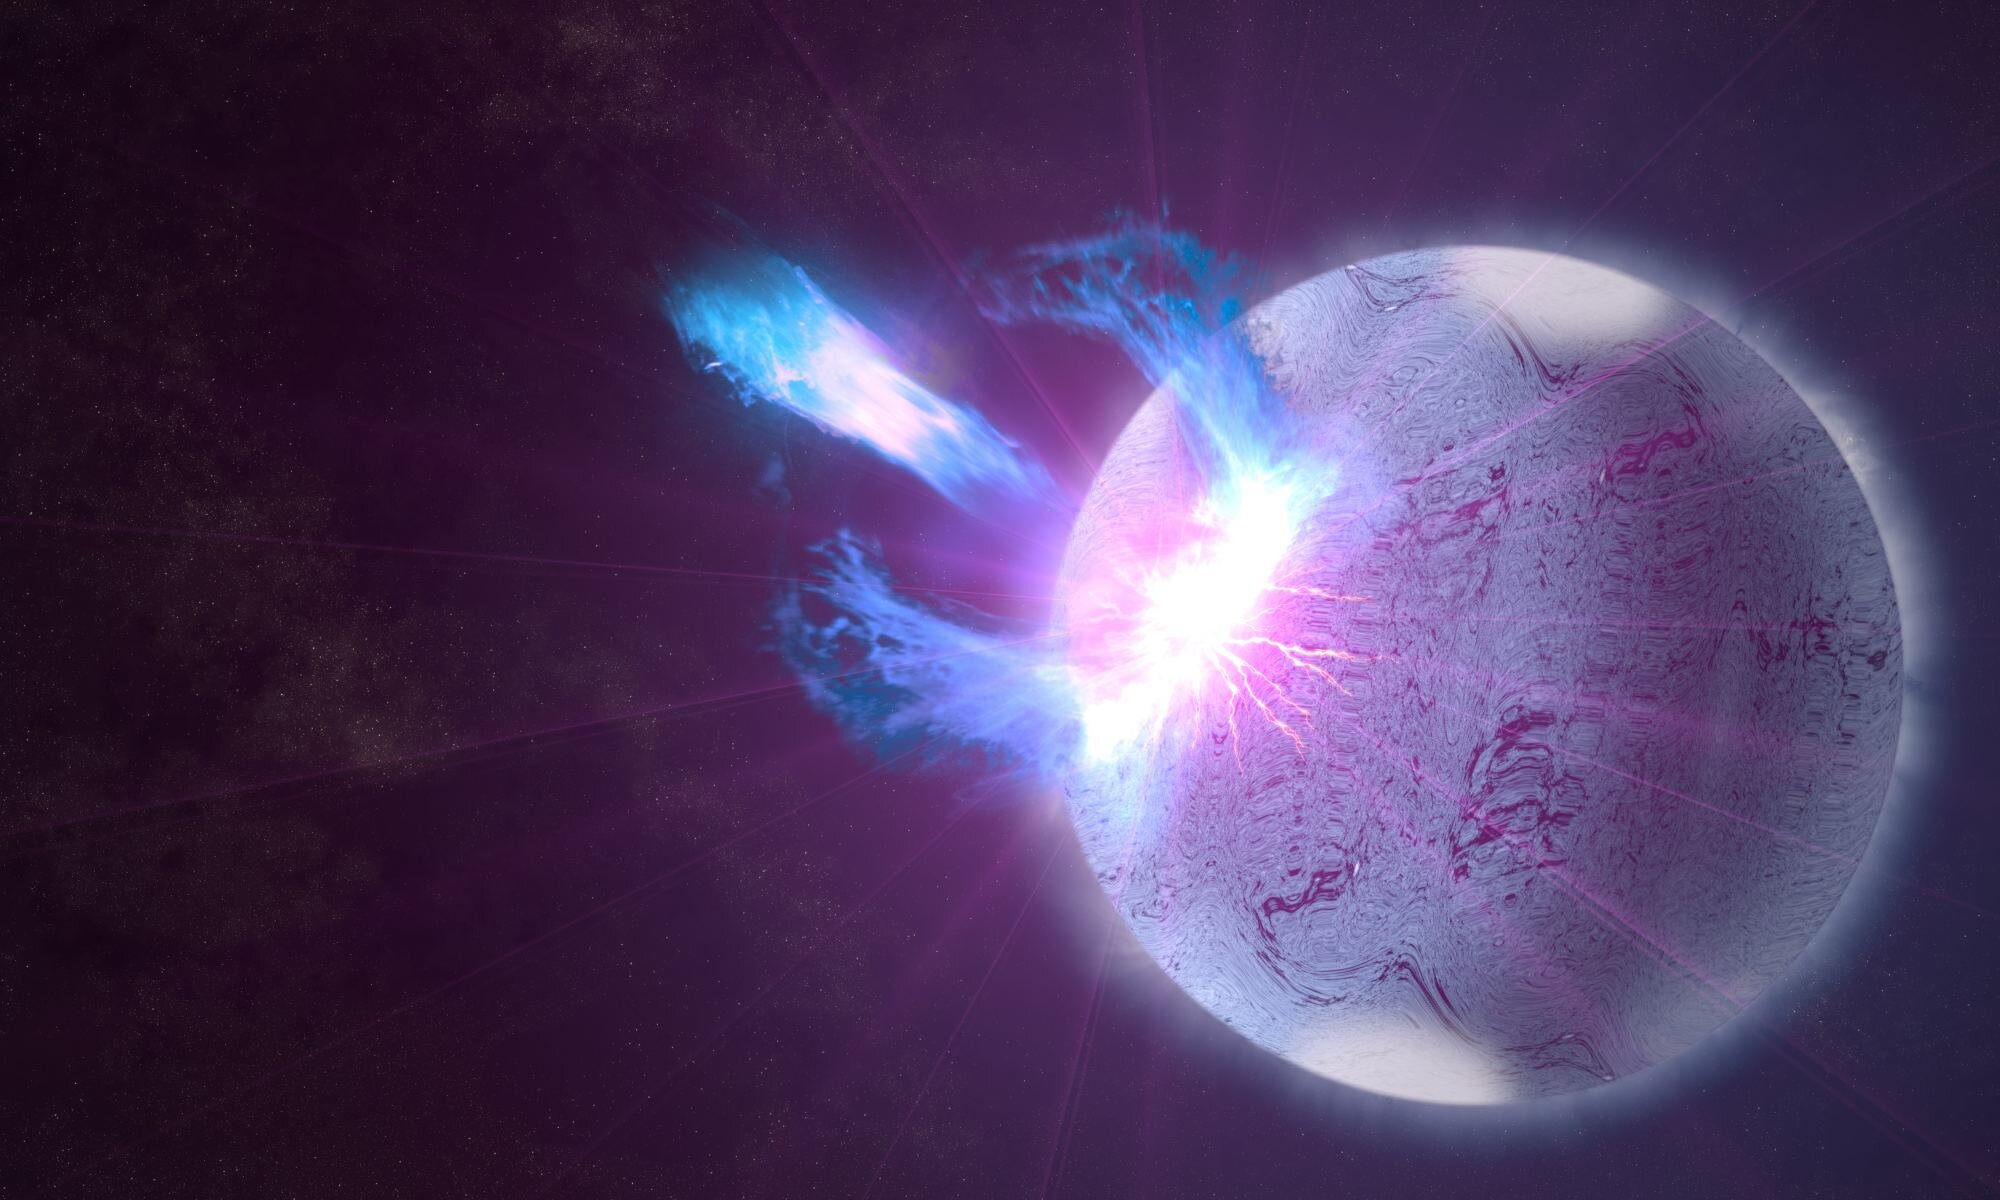 Illustration of a strongly magnetized neutron star, referred to as a magnetar. Image courtesy of NASA's Goddard Space Flight Center/S. Wiessinger.